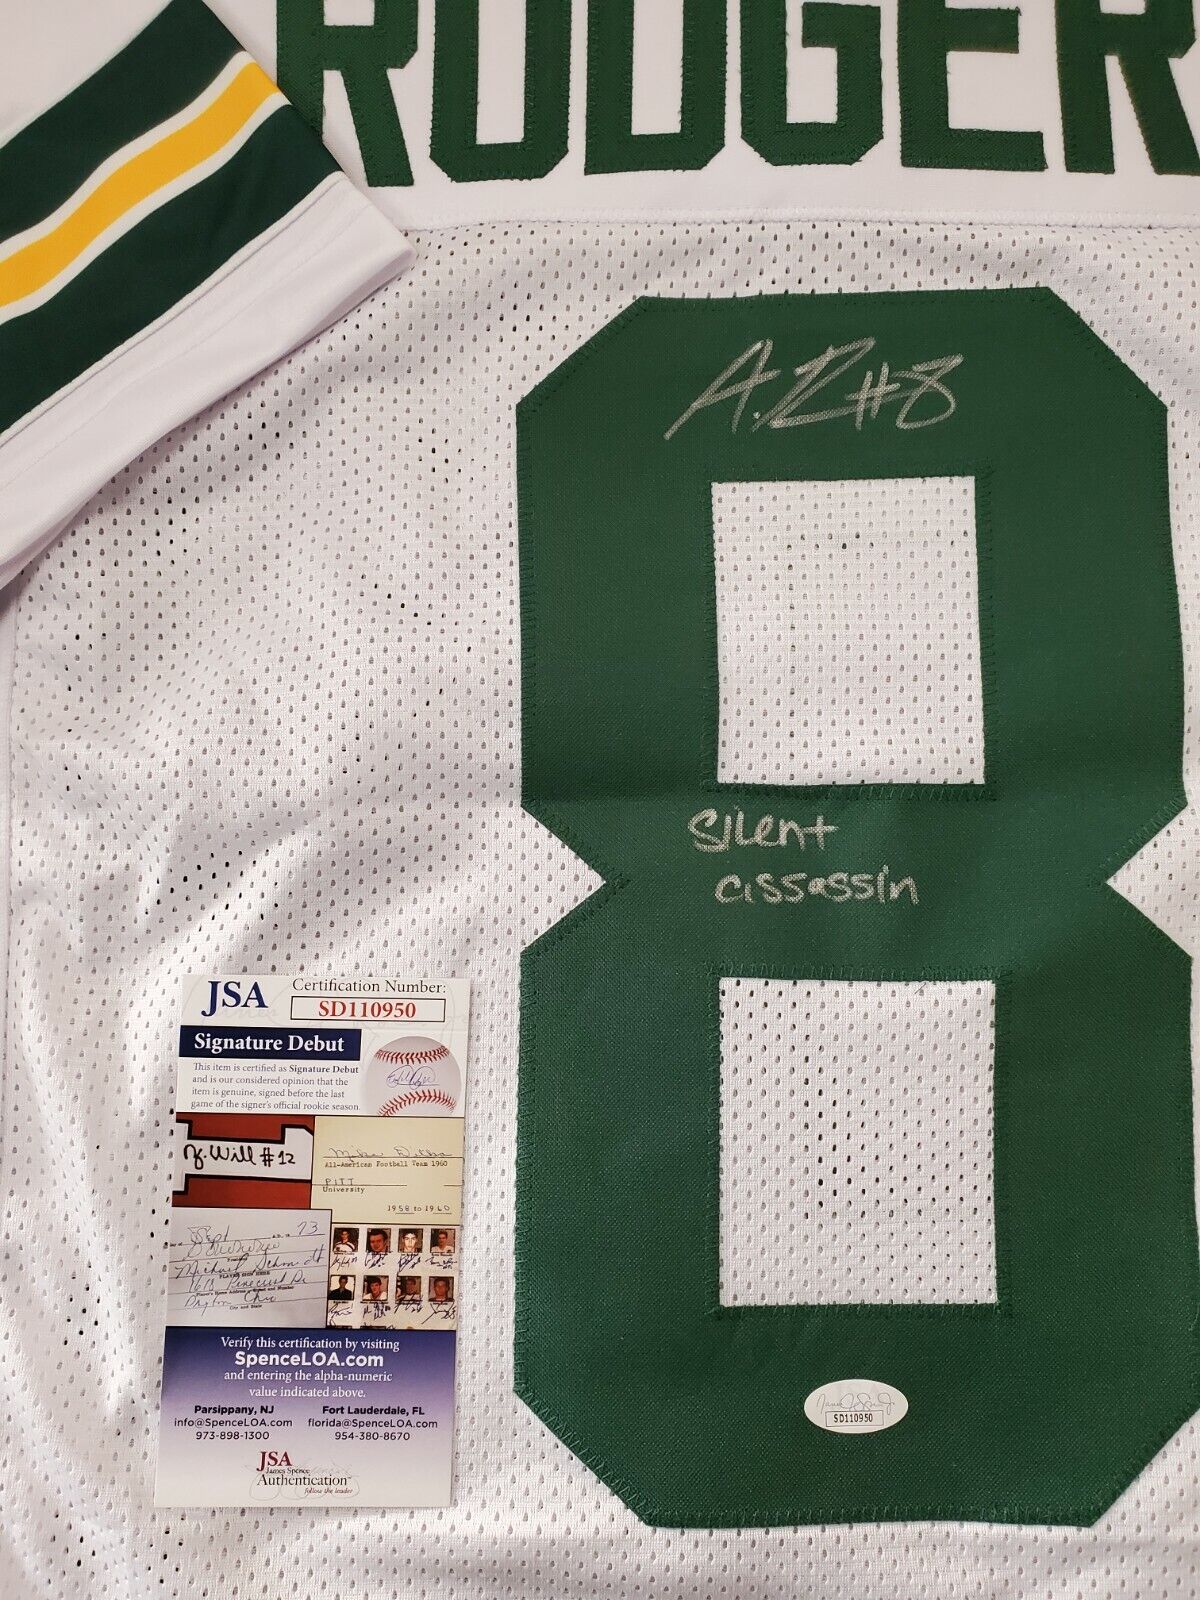 MVP Authentics Green Bay Packers Amari Rodgers Autographed Signed Inscribed Jersey Jsa Coa 144 sports jersey framing , jersey framing